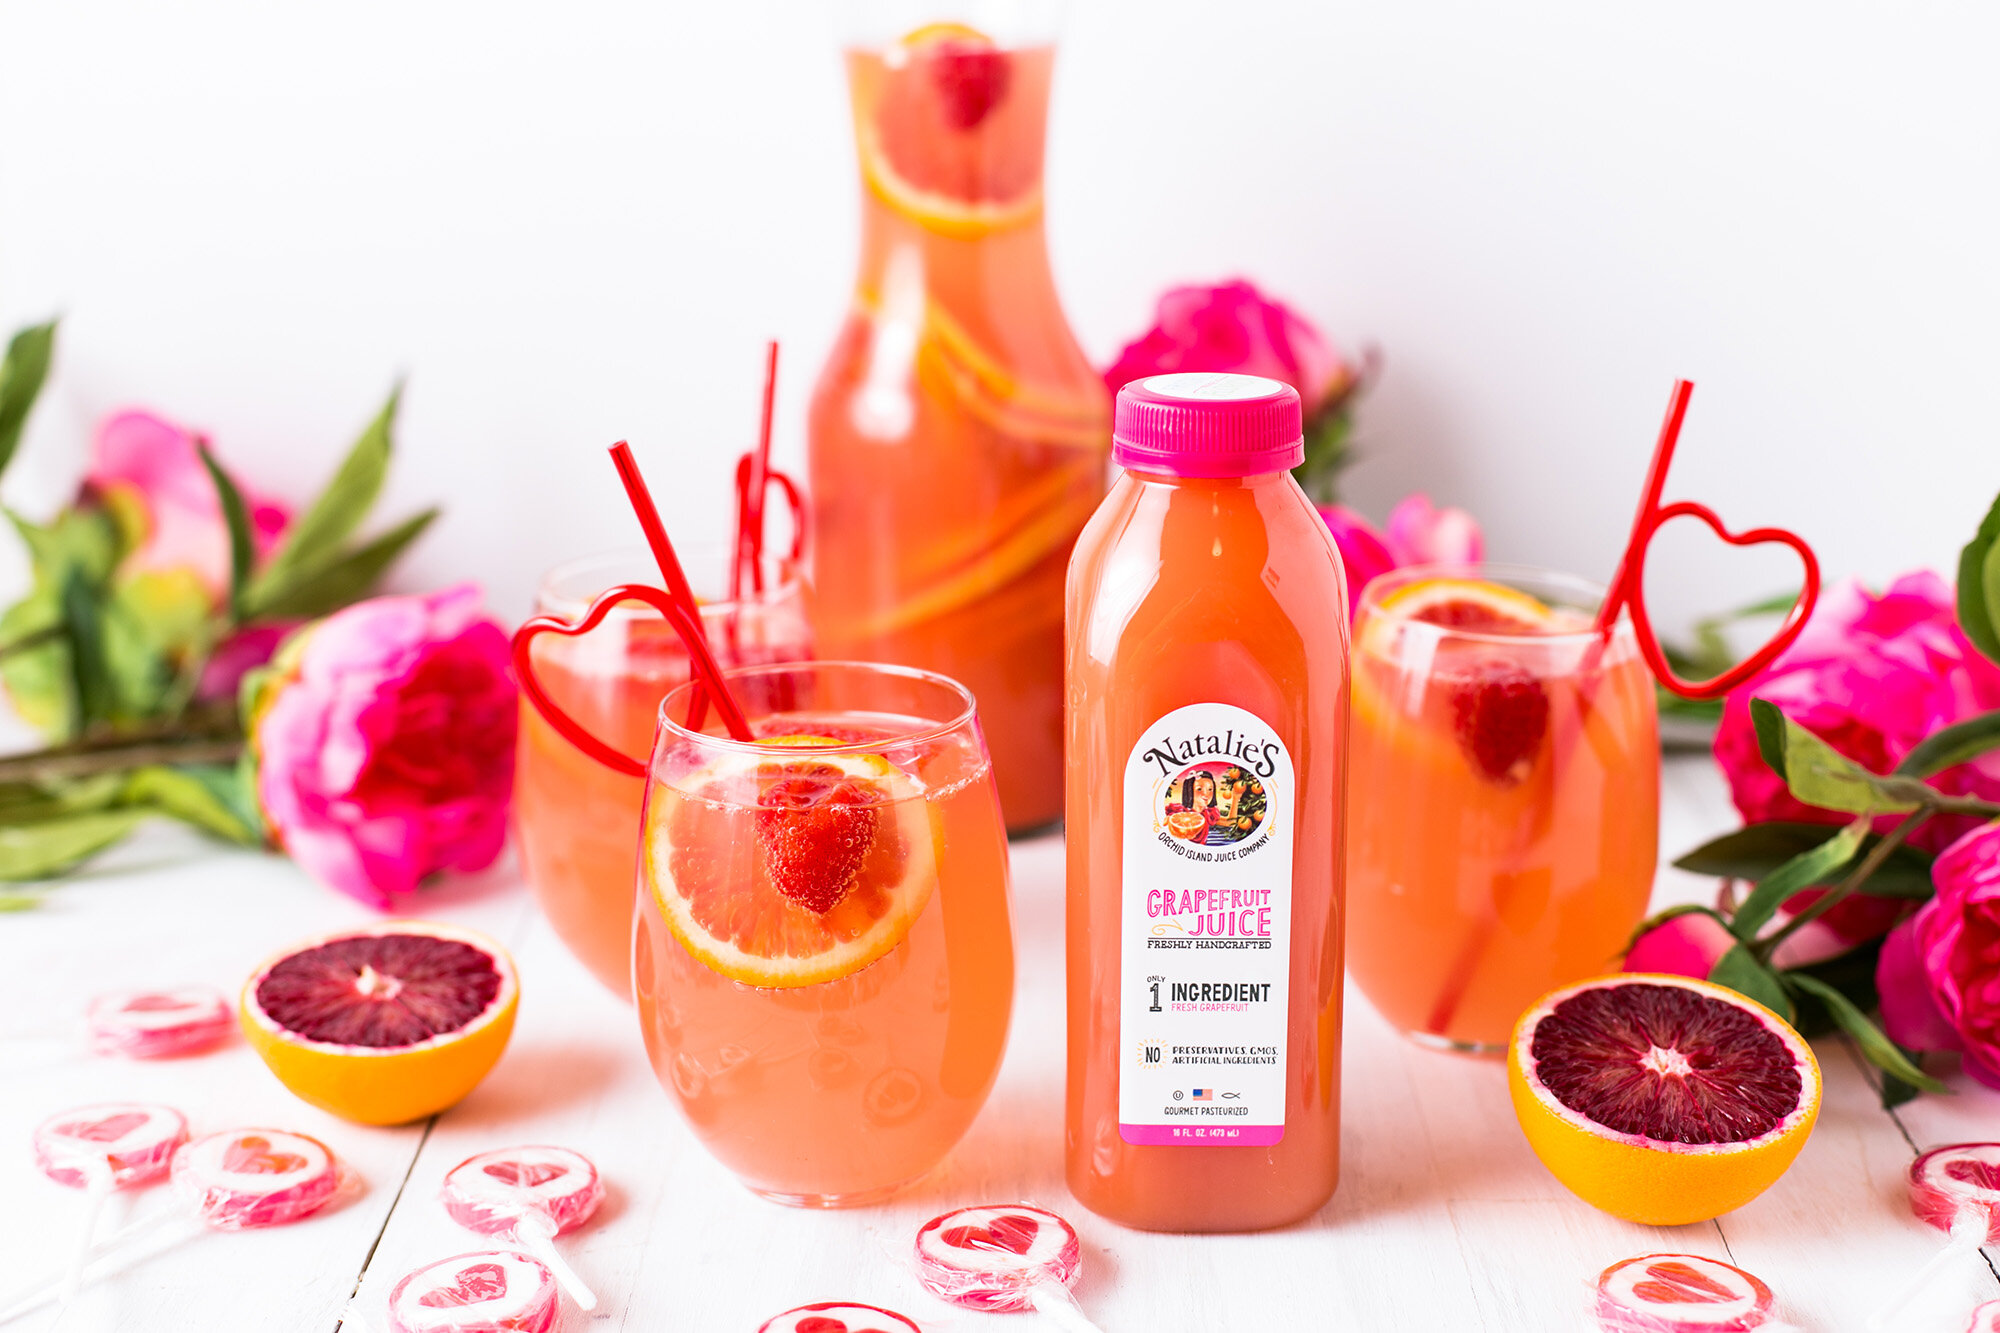   Ingredients   1 750 ml. Bottle dry Rosé 1/2 cup Natalie’s Grapefruit Juice 1/2 cup Vodka 1/4 cup Agave nectar (or sweetener of your choice), to taste 1 cup Fresh strawberries and/or raspberries 1 Blood orange, thinly sliced 1 Red grapefruit, thinly